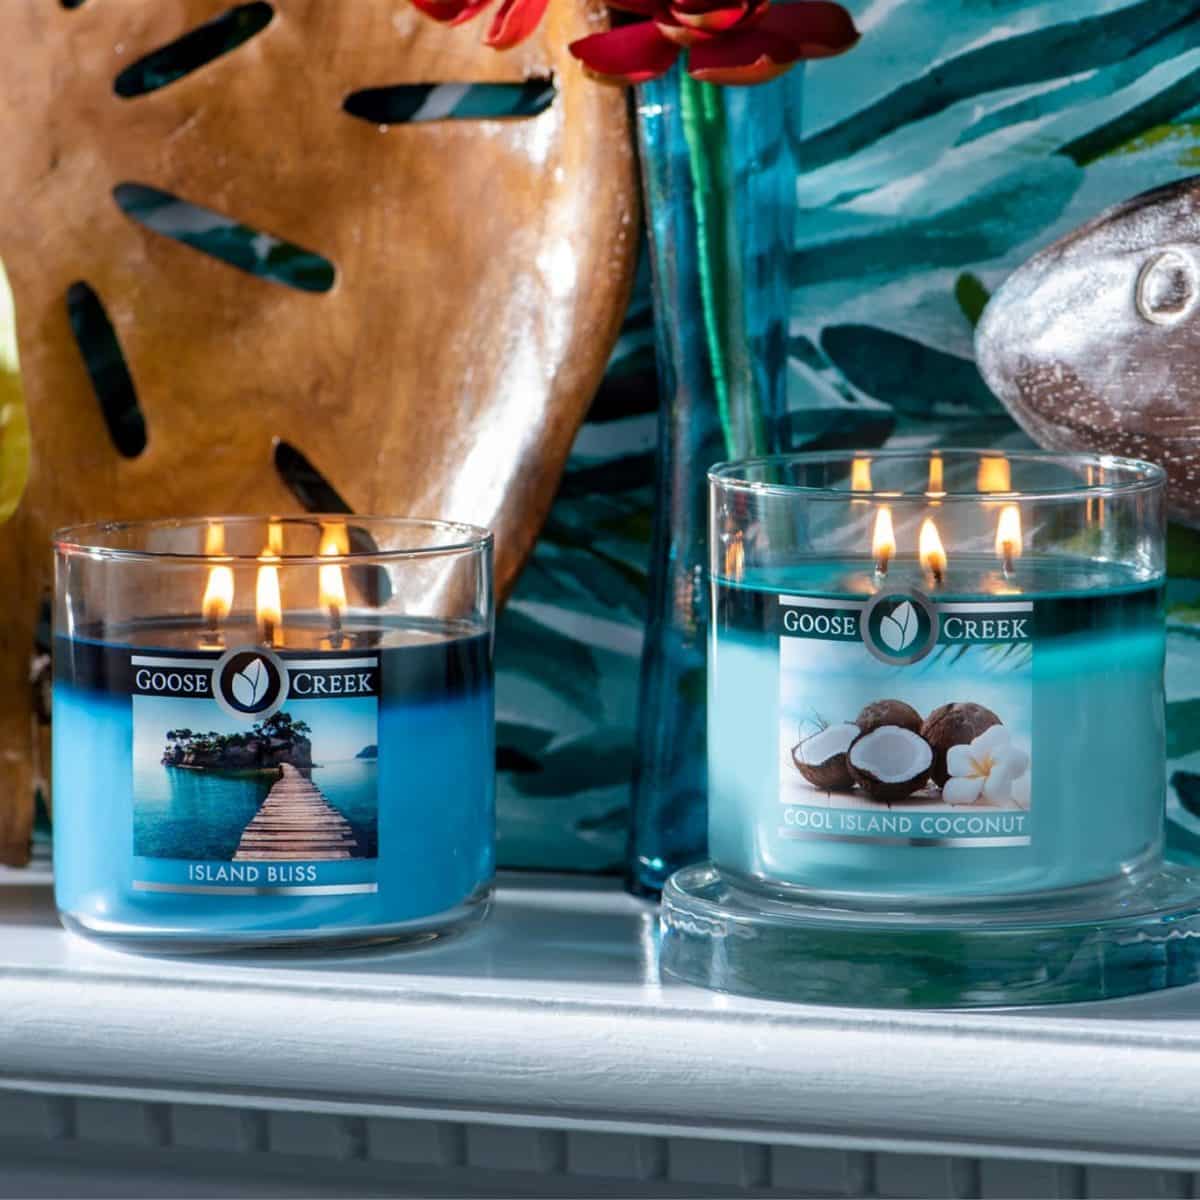 Goose Creek Candles Review Must Read This Before Buying